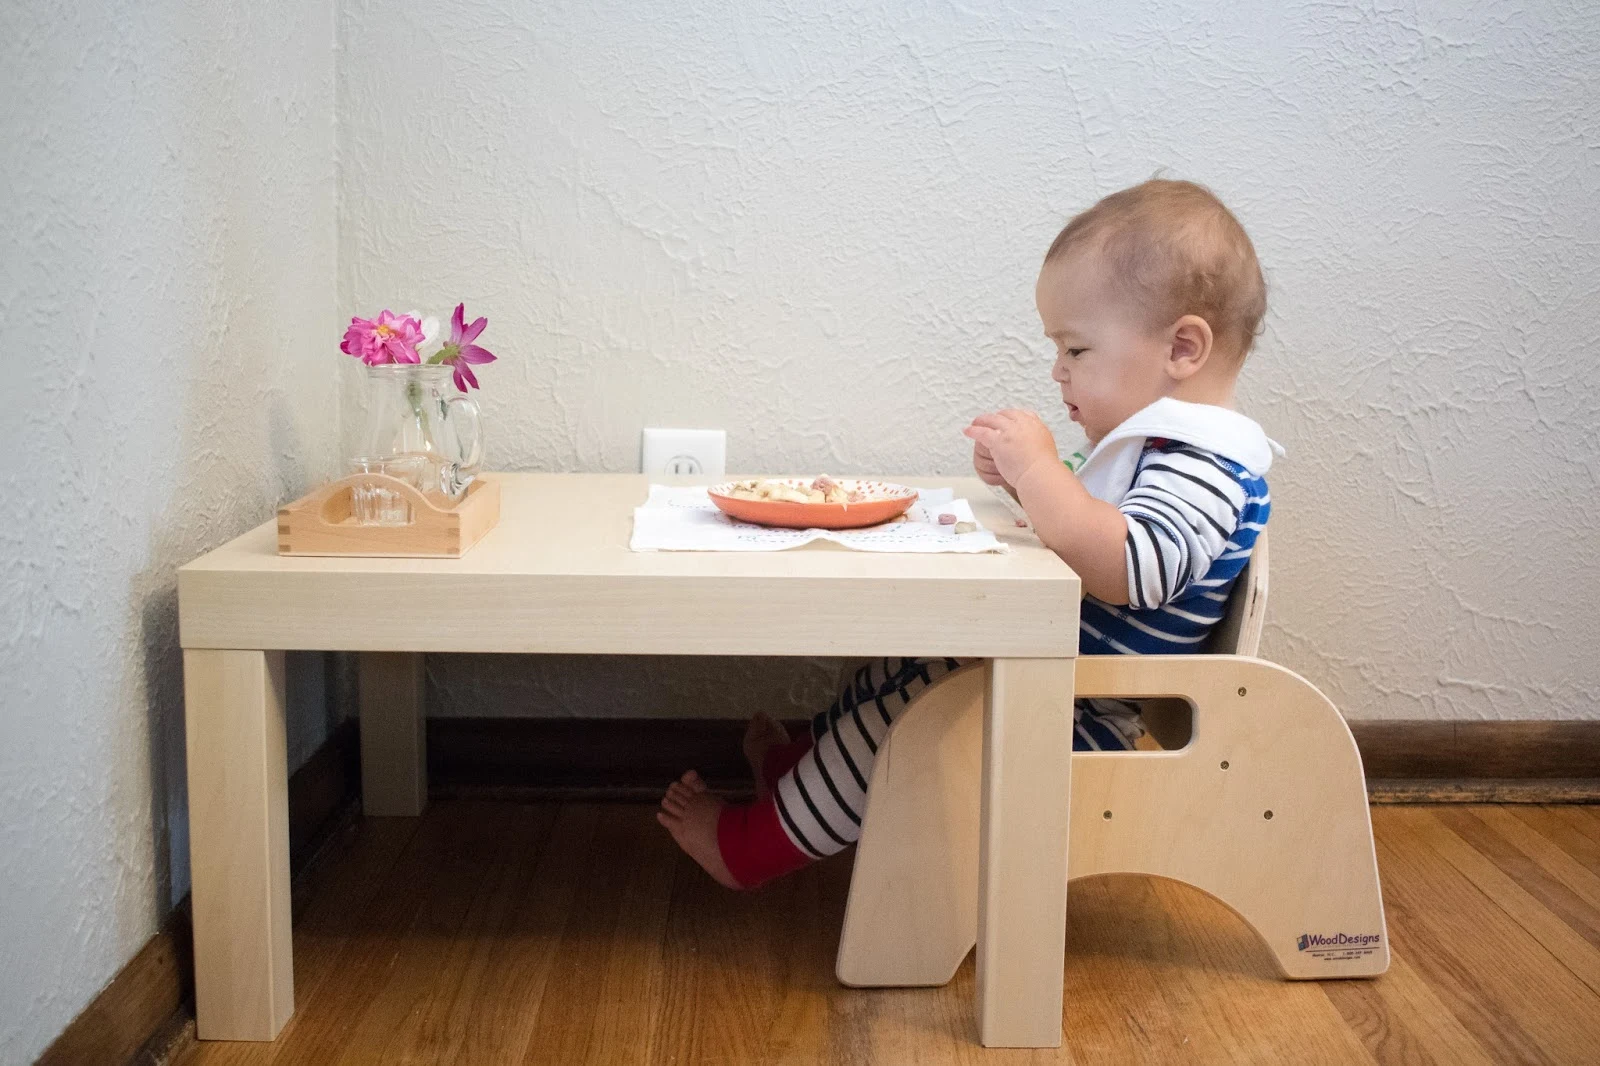 A look at different Montessori home setups for baby eating spaces. These small weaning tables are a perfect baby activity area and provide opportunities for independent eating